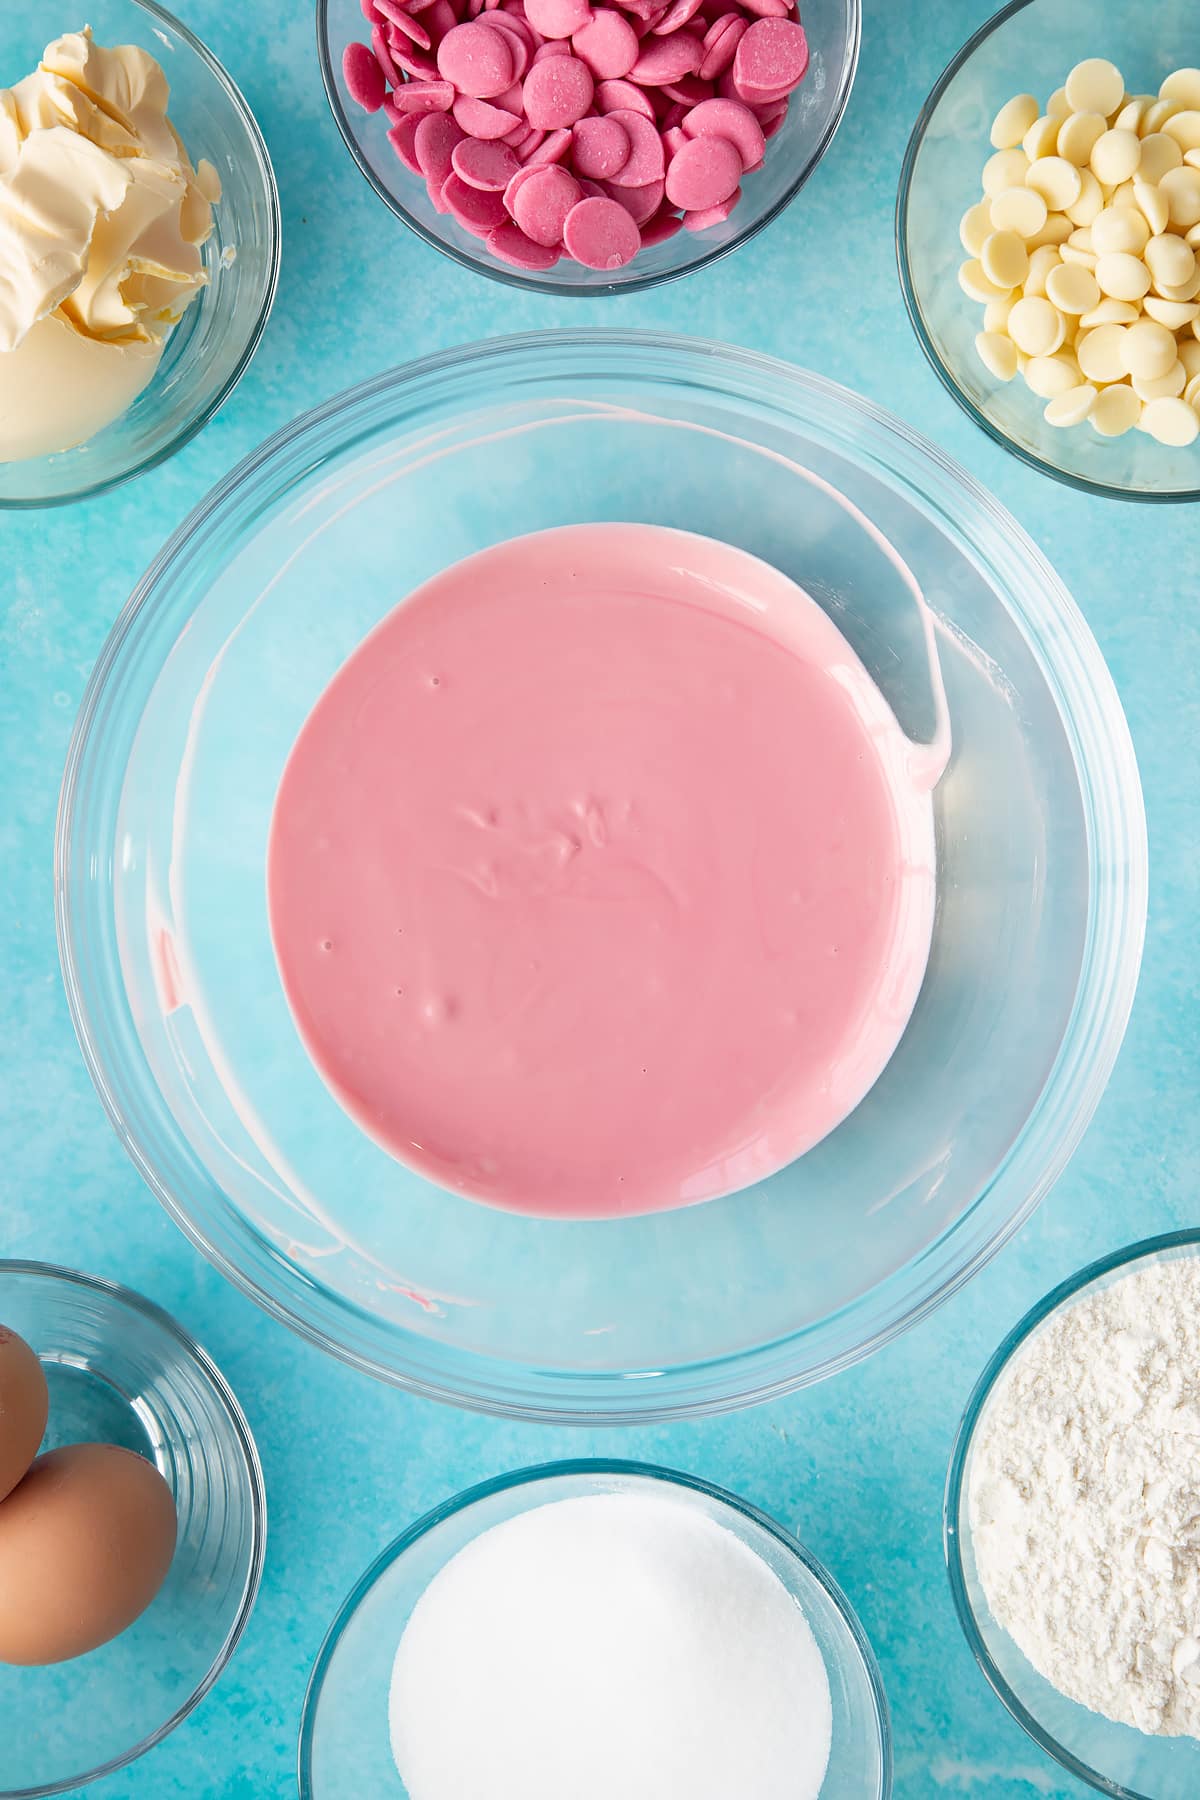 melted pink candy melts and white chocolate mixed together in a large clear bowl.